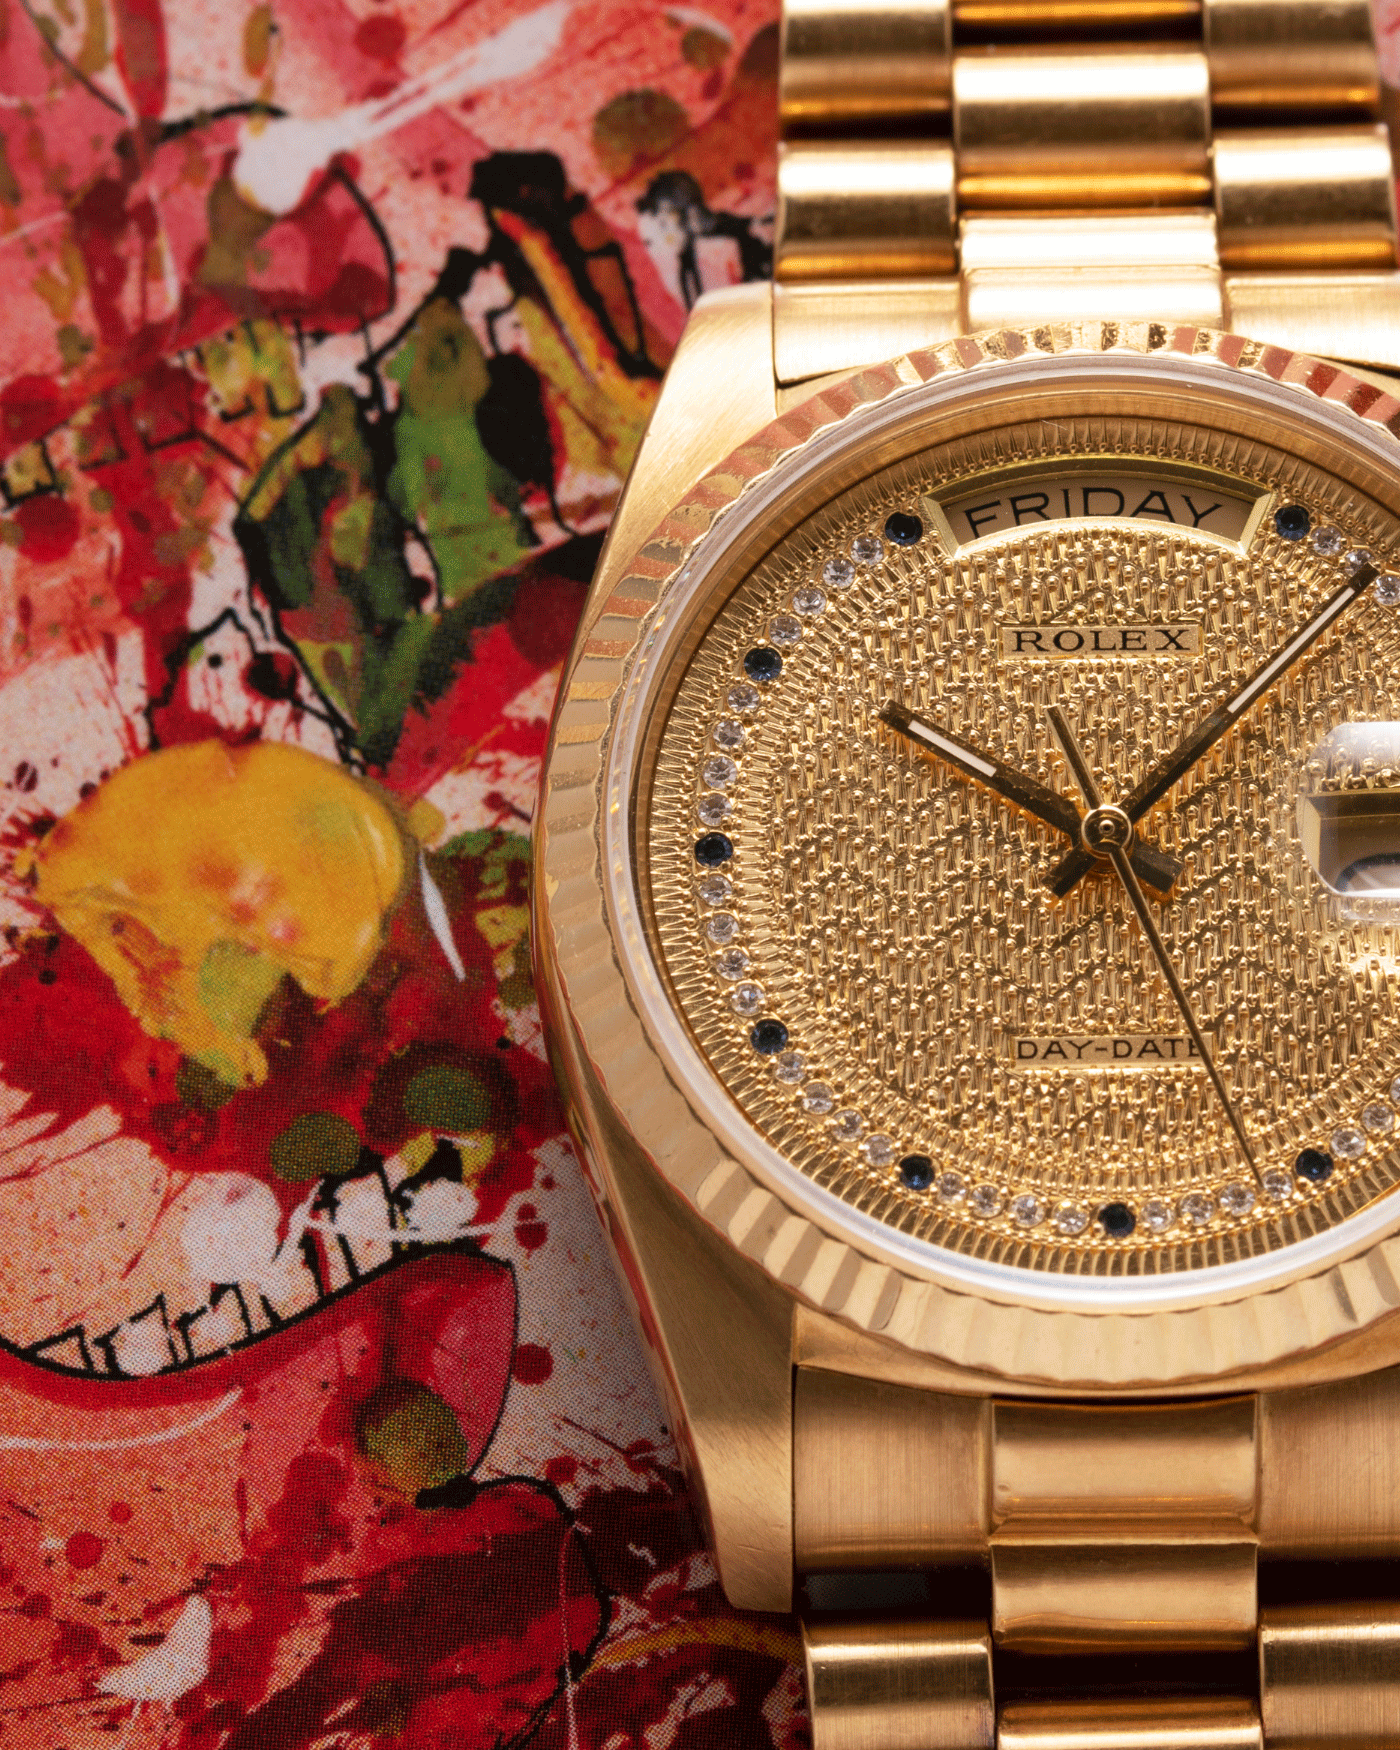 Brand: Rolex Year: 1987 Model: Day Date Reference Number: 18038 Serial Number: 9,6XX,XXX Material: 18k Yellow Gold Movement: Cal. 3055 Case Diameter: 36mm Lug Width: 20mm Bracelet/Strap: Rolex 18k Solid Gold President Bracelet